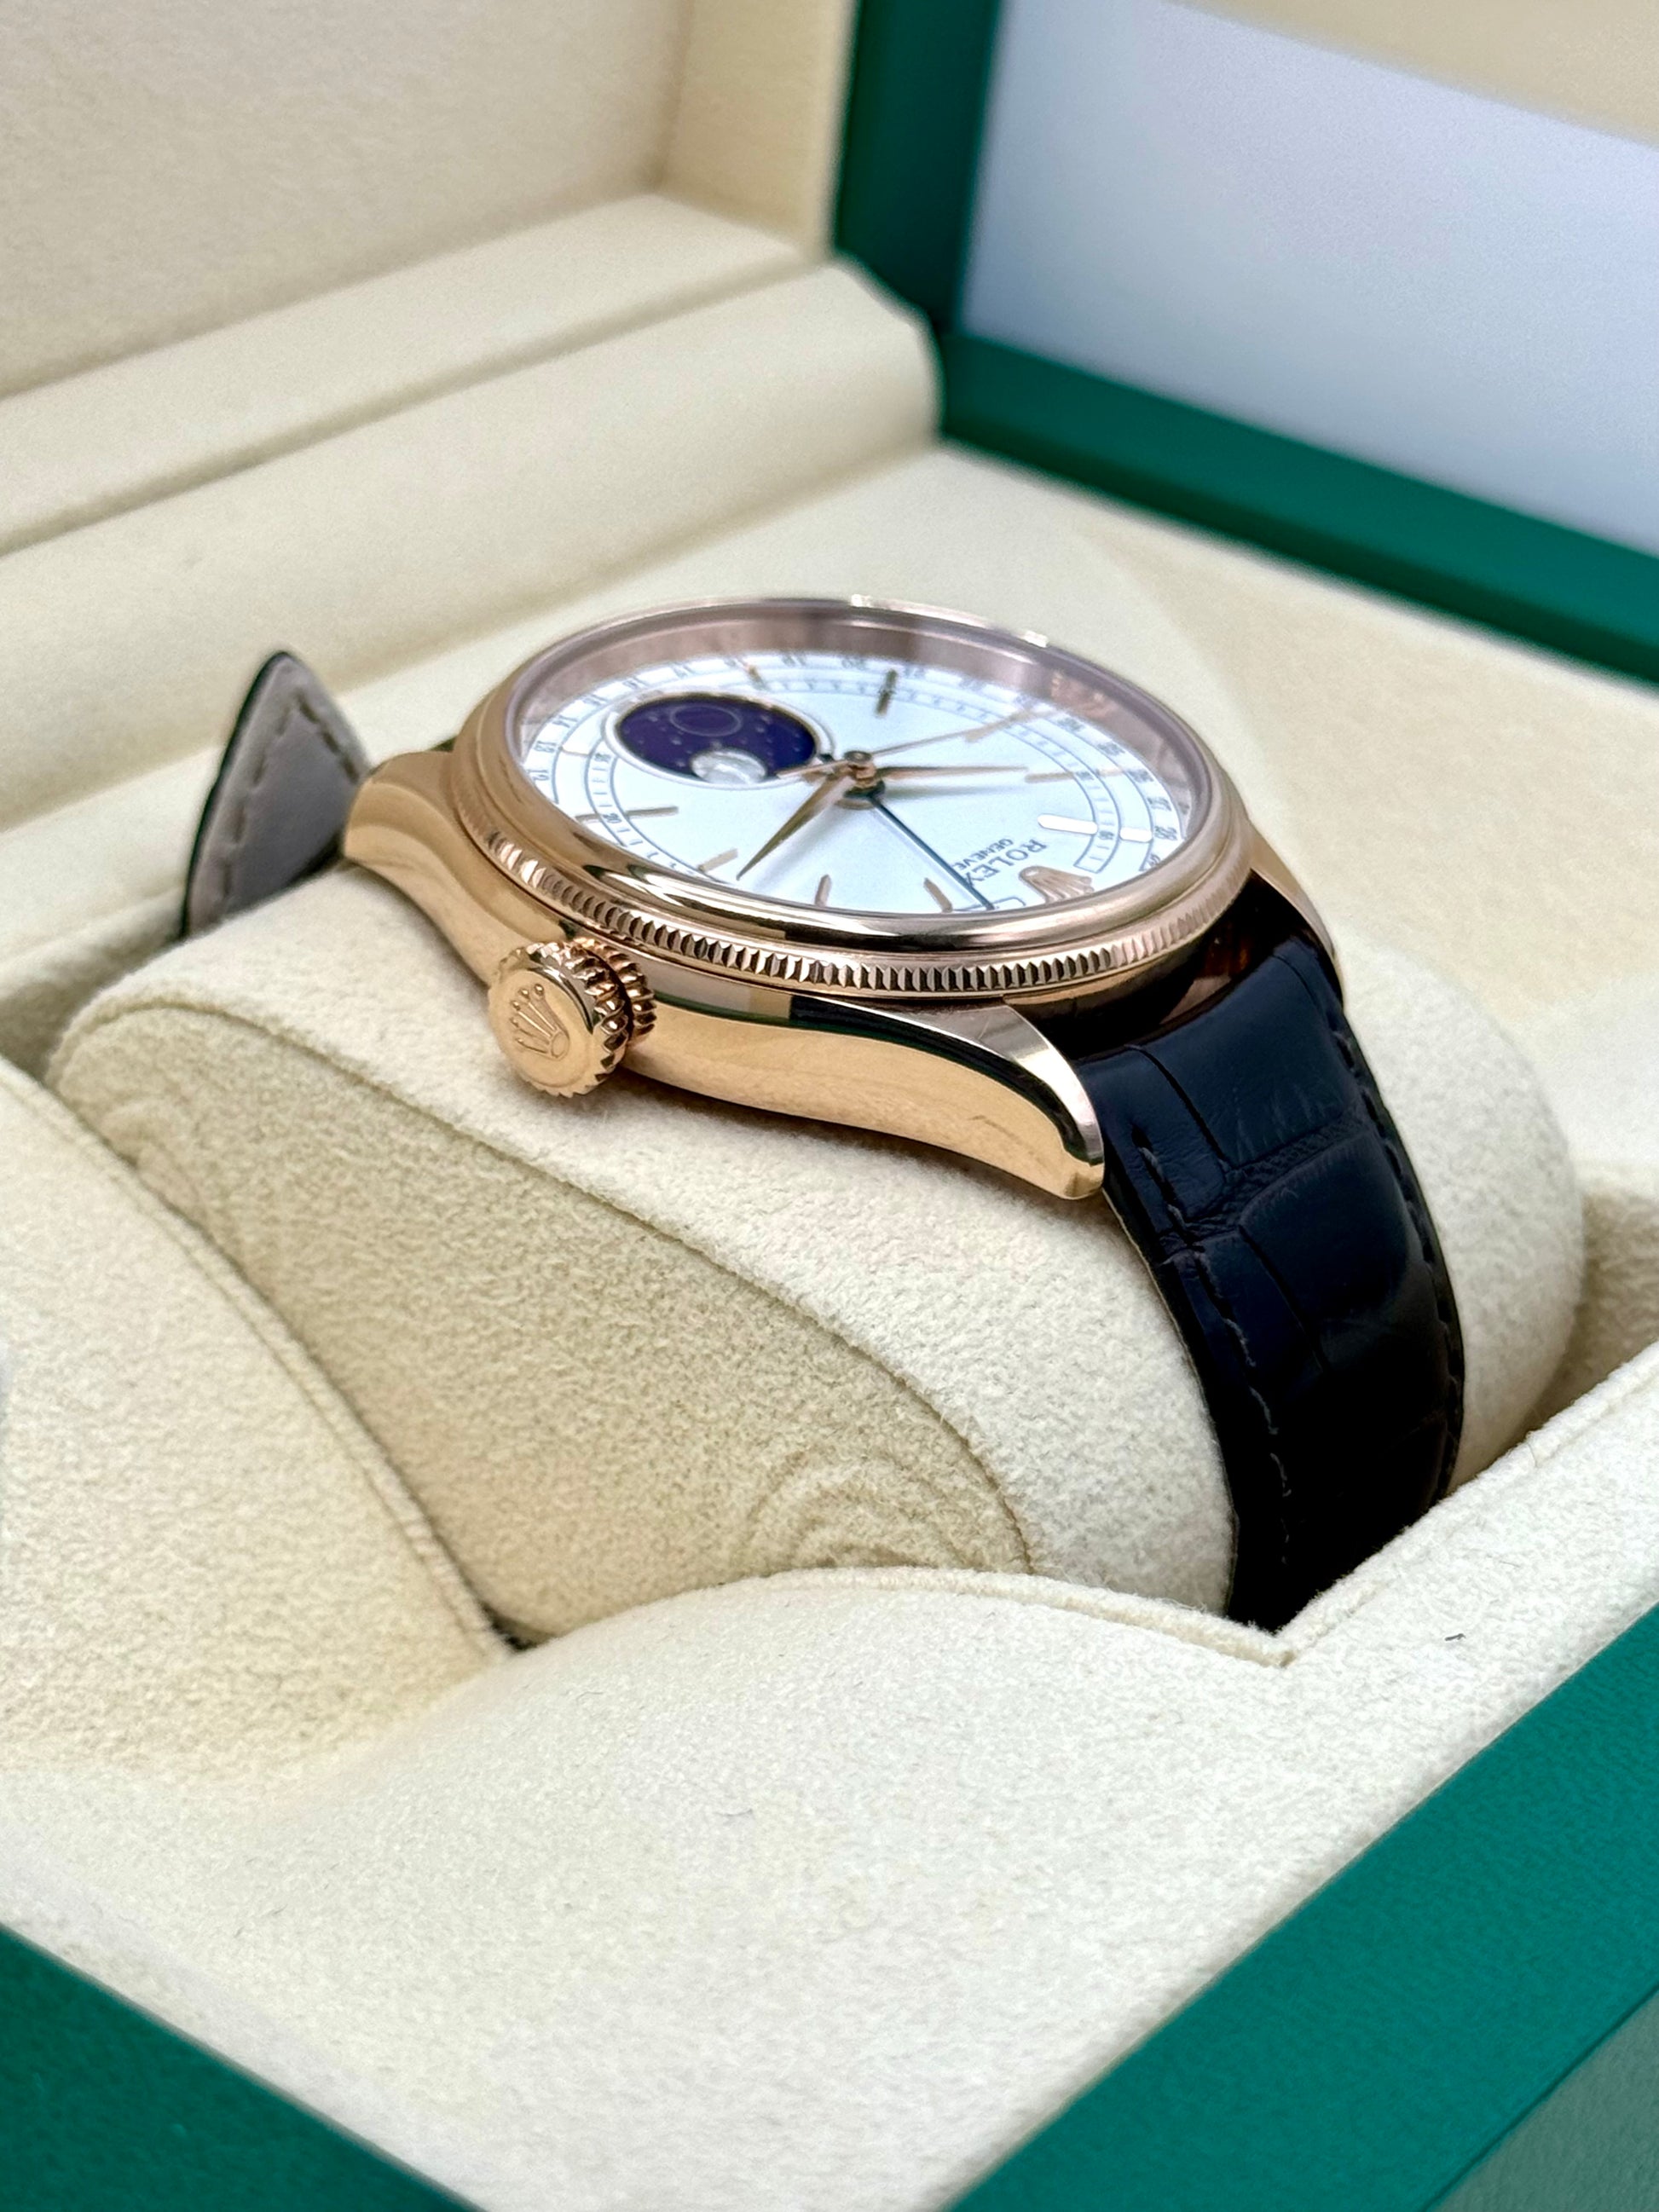 2020 Cellini Moonphase 39mm 50535 Rose Gold White Dial - MyWatchLLC